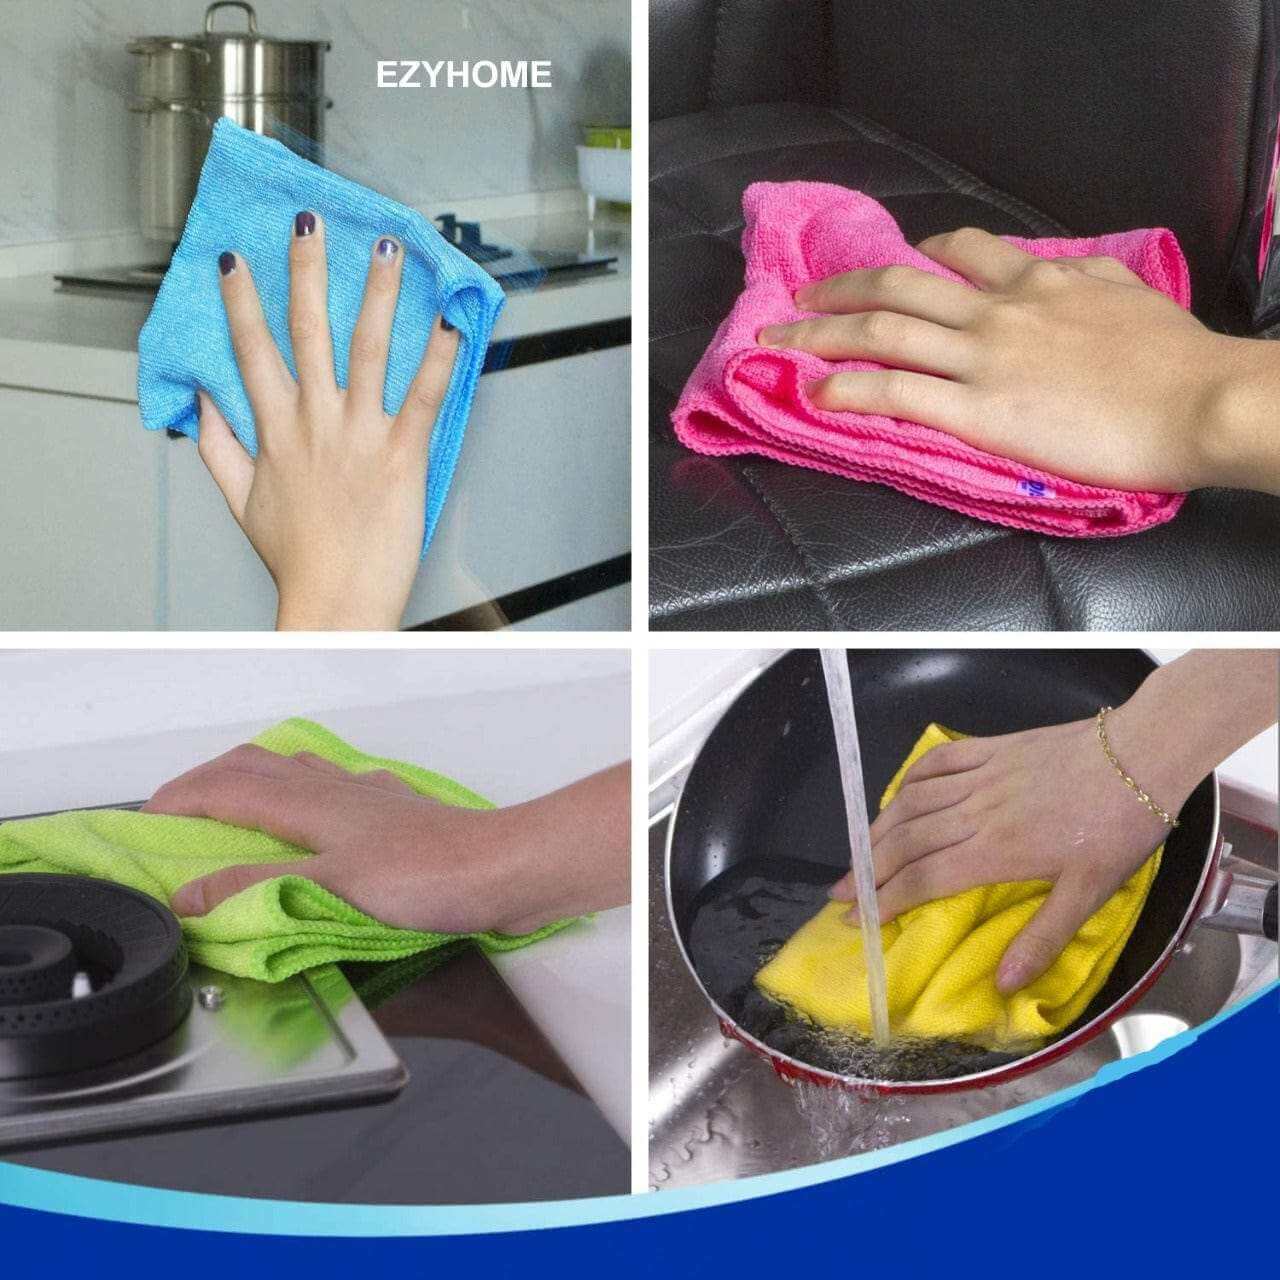 EZYHOME 7pcs Microfiber Cleaning Cloths, Non-Abrasive, Super Absorbent Reusable and Washable Kitchen Towel, Car Cleaning Cloth, Streak Free Multipurpose Lint Free Glasses Cleaning Cloth - kut